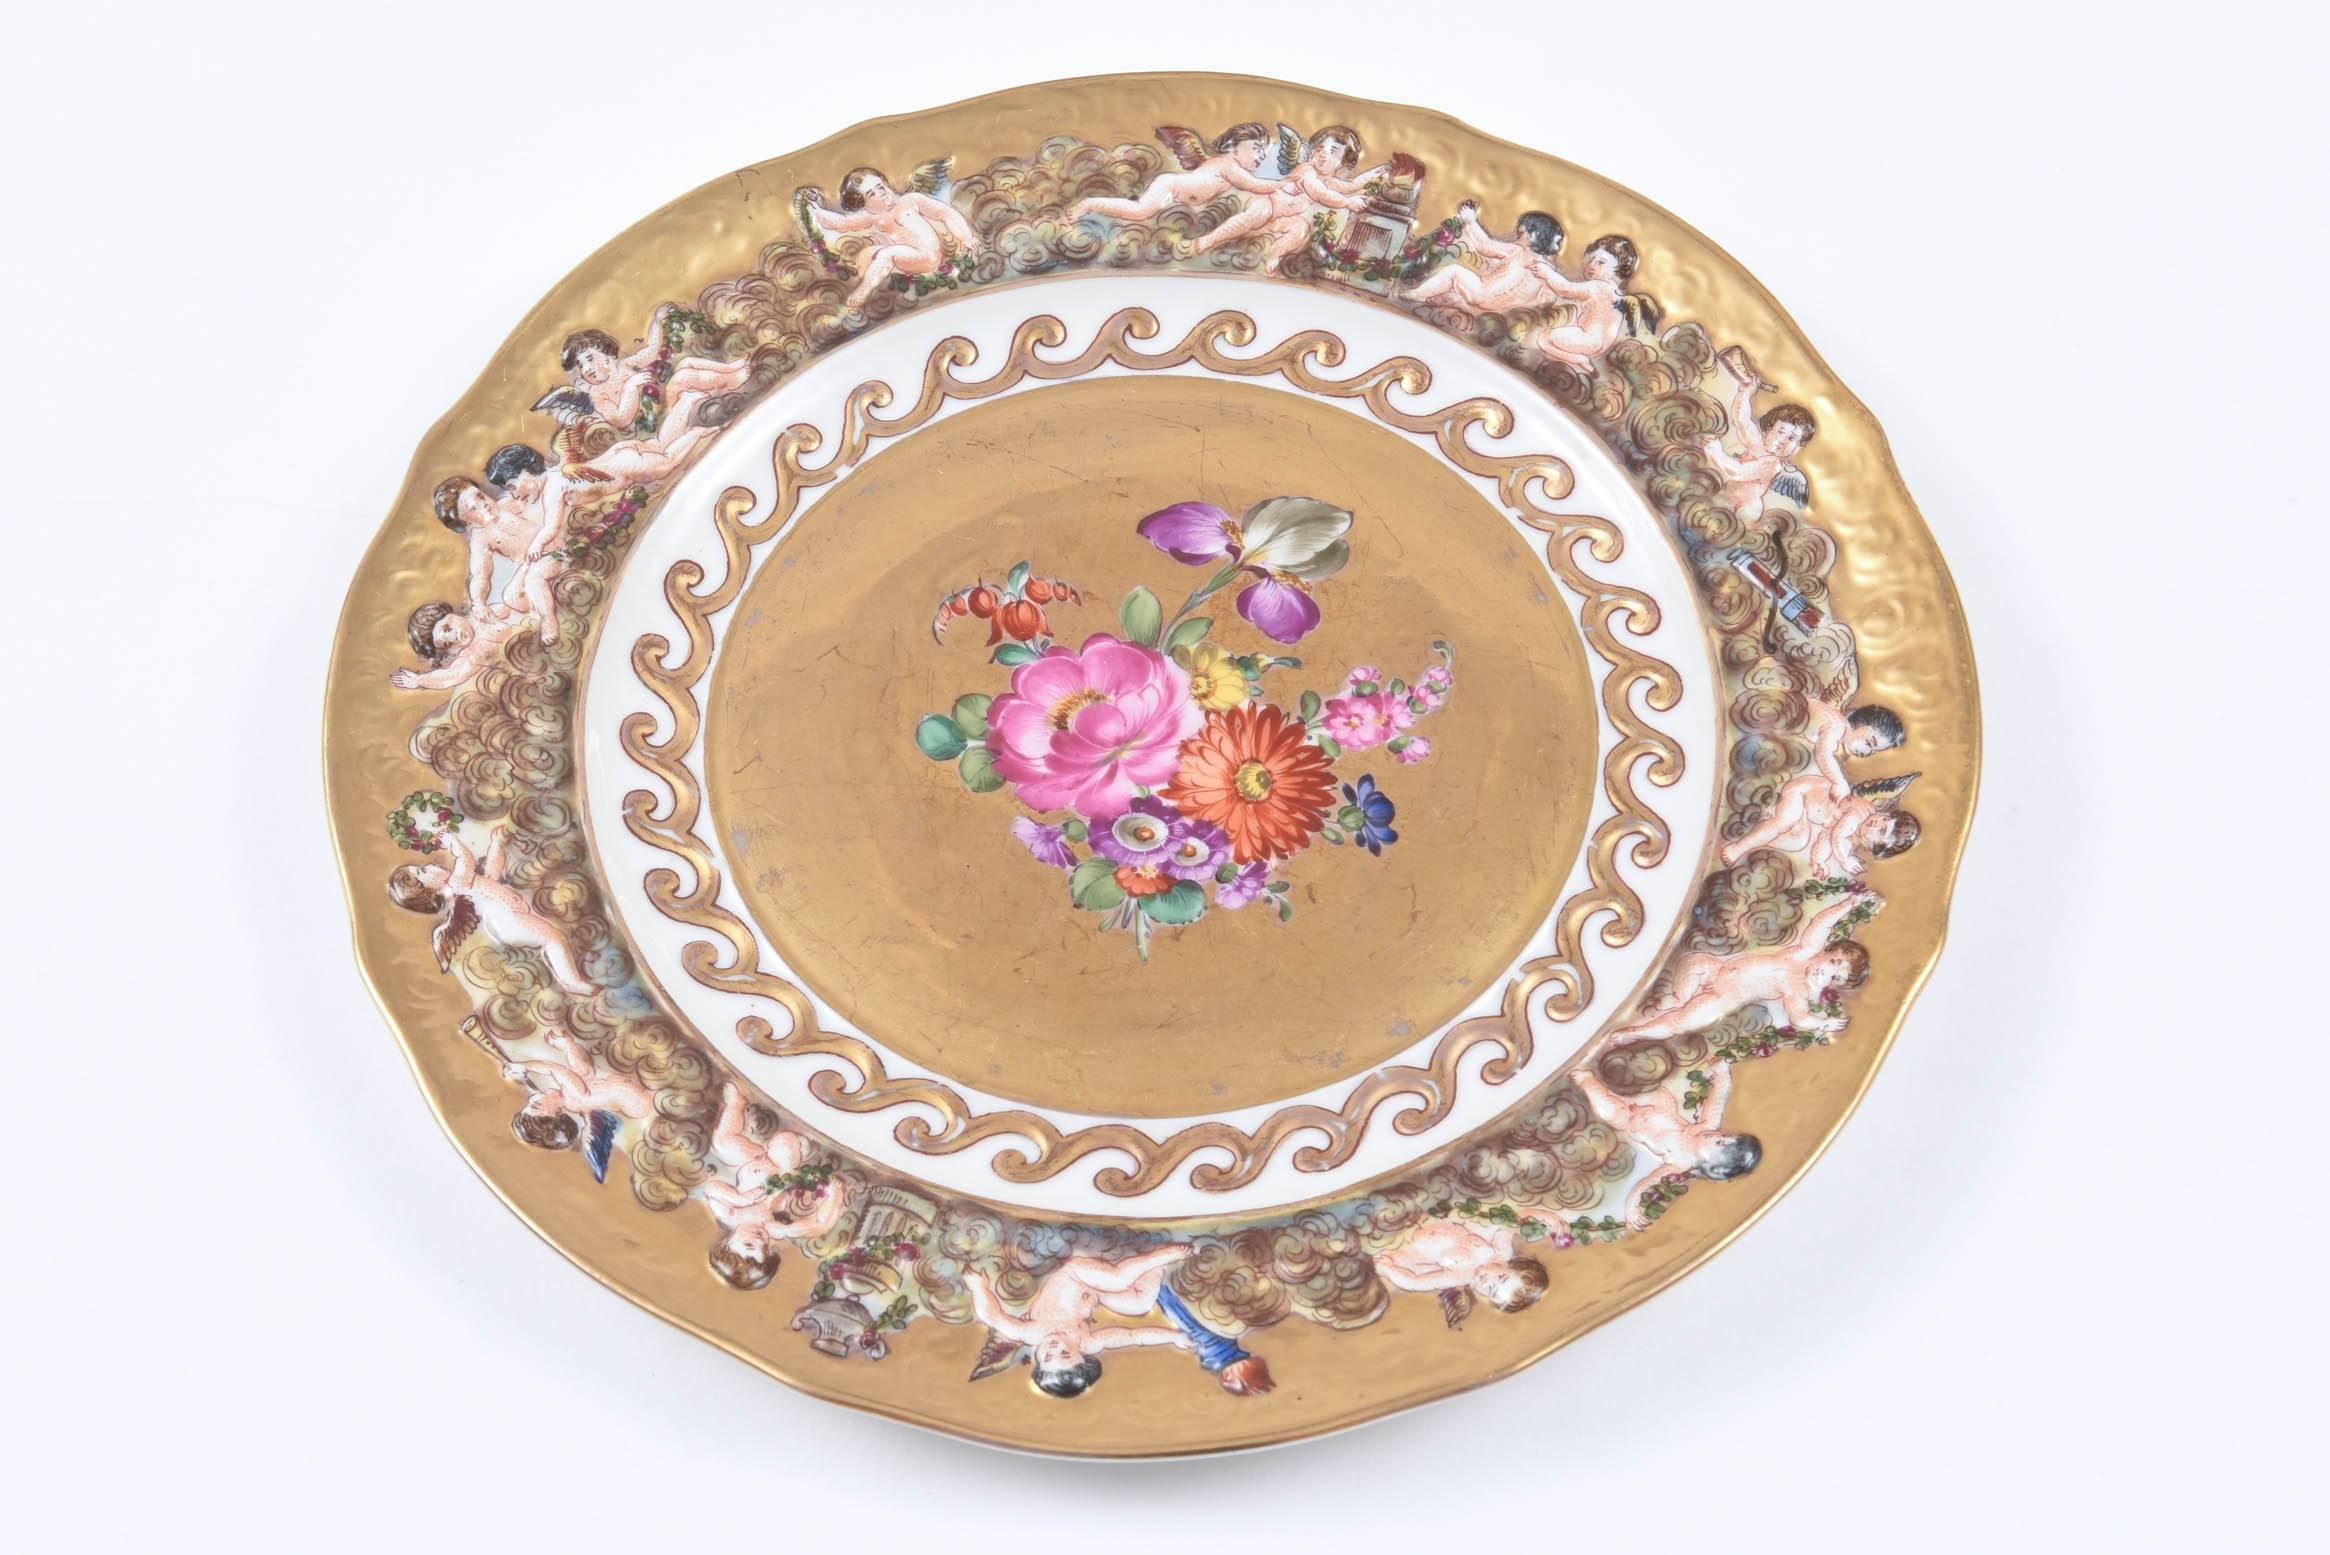 So decorative with bright hand-painted florals on an all-over 24-karat gilt background. Capo Di Monte's signature raised relief putti encircling the plate on its pretty hand-painted and hand molded shoulders. As they are over 100 years old, they do